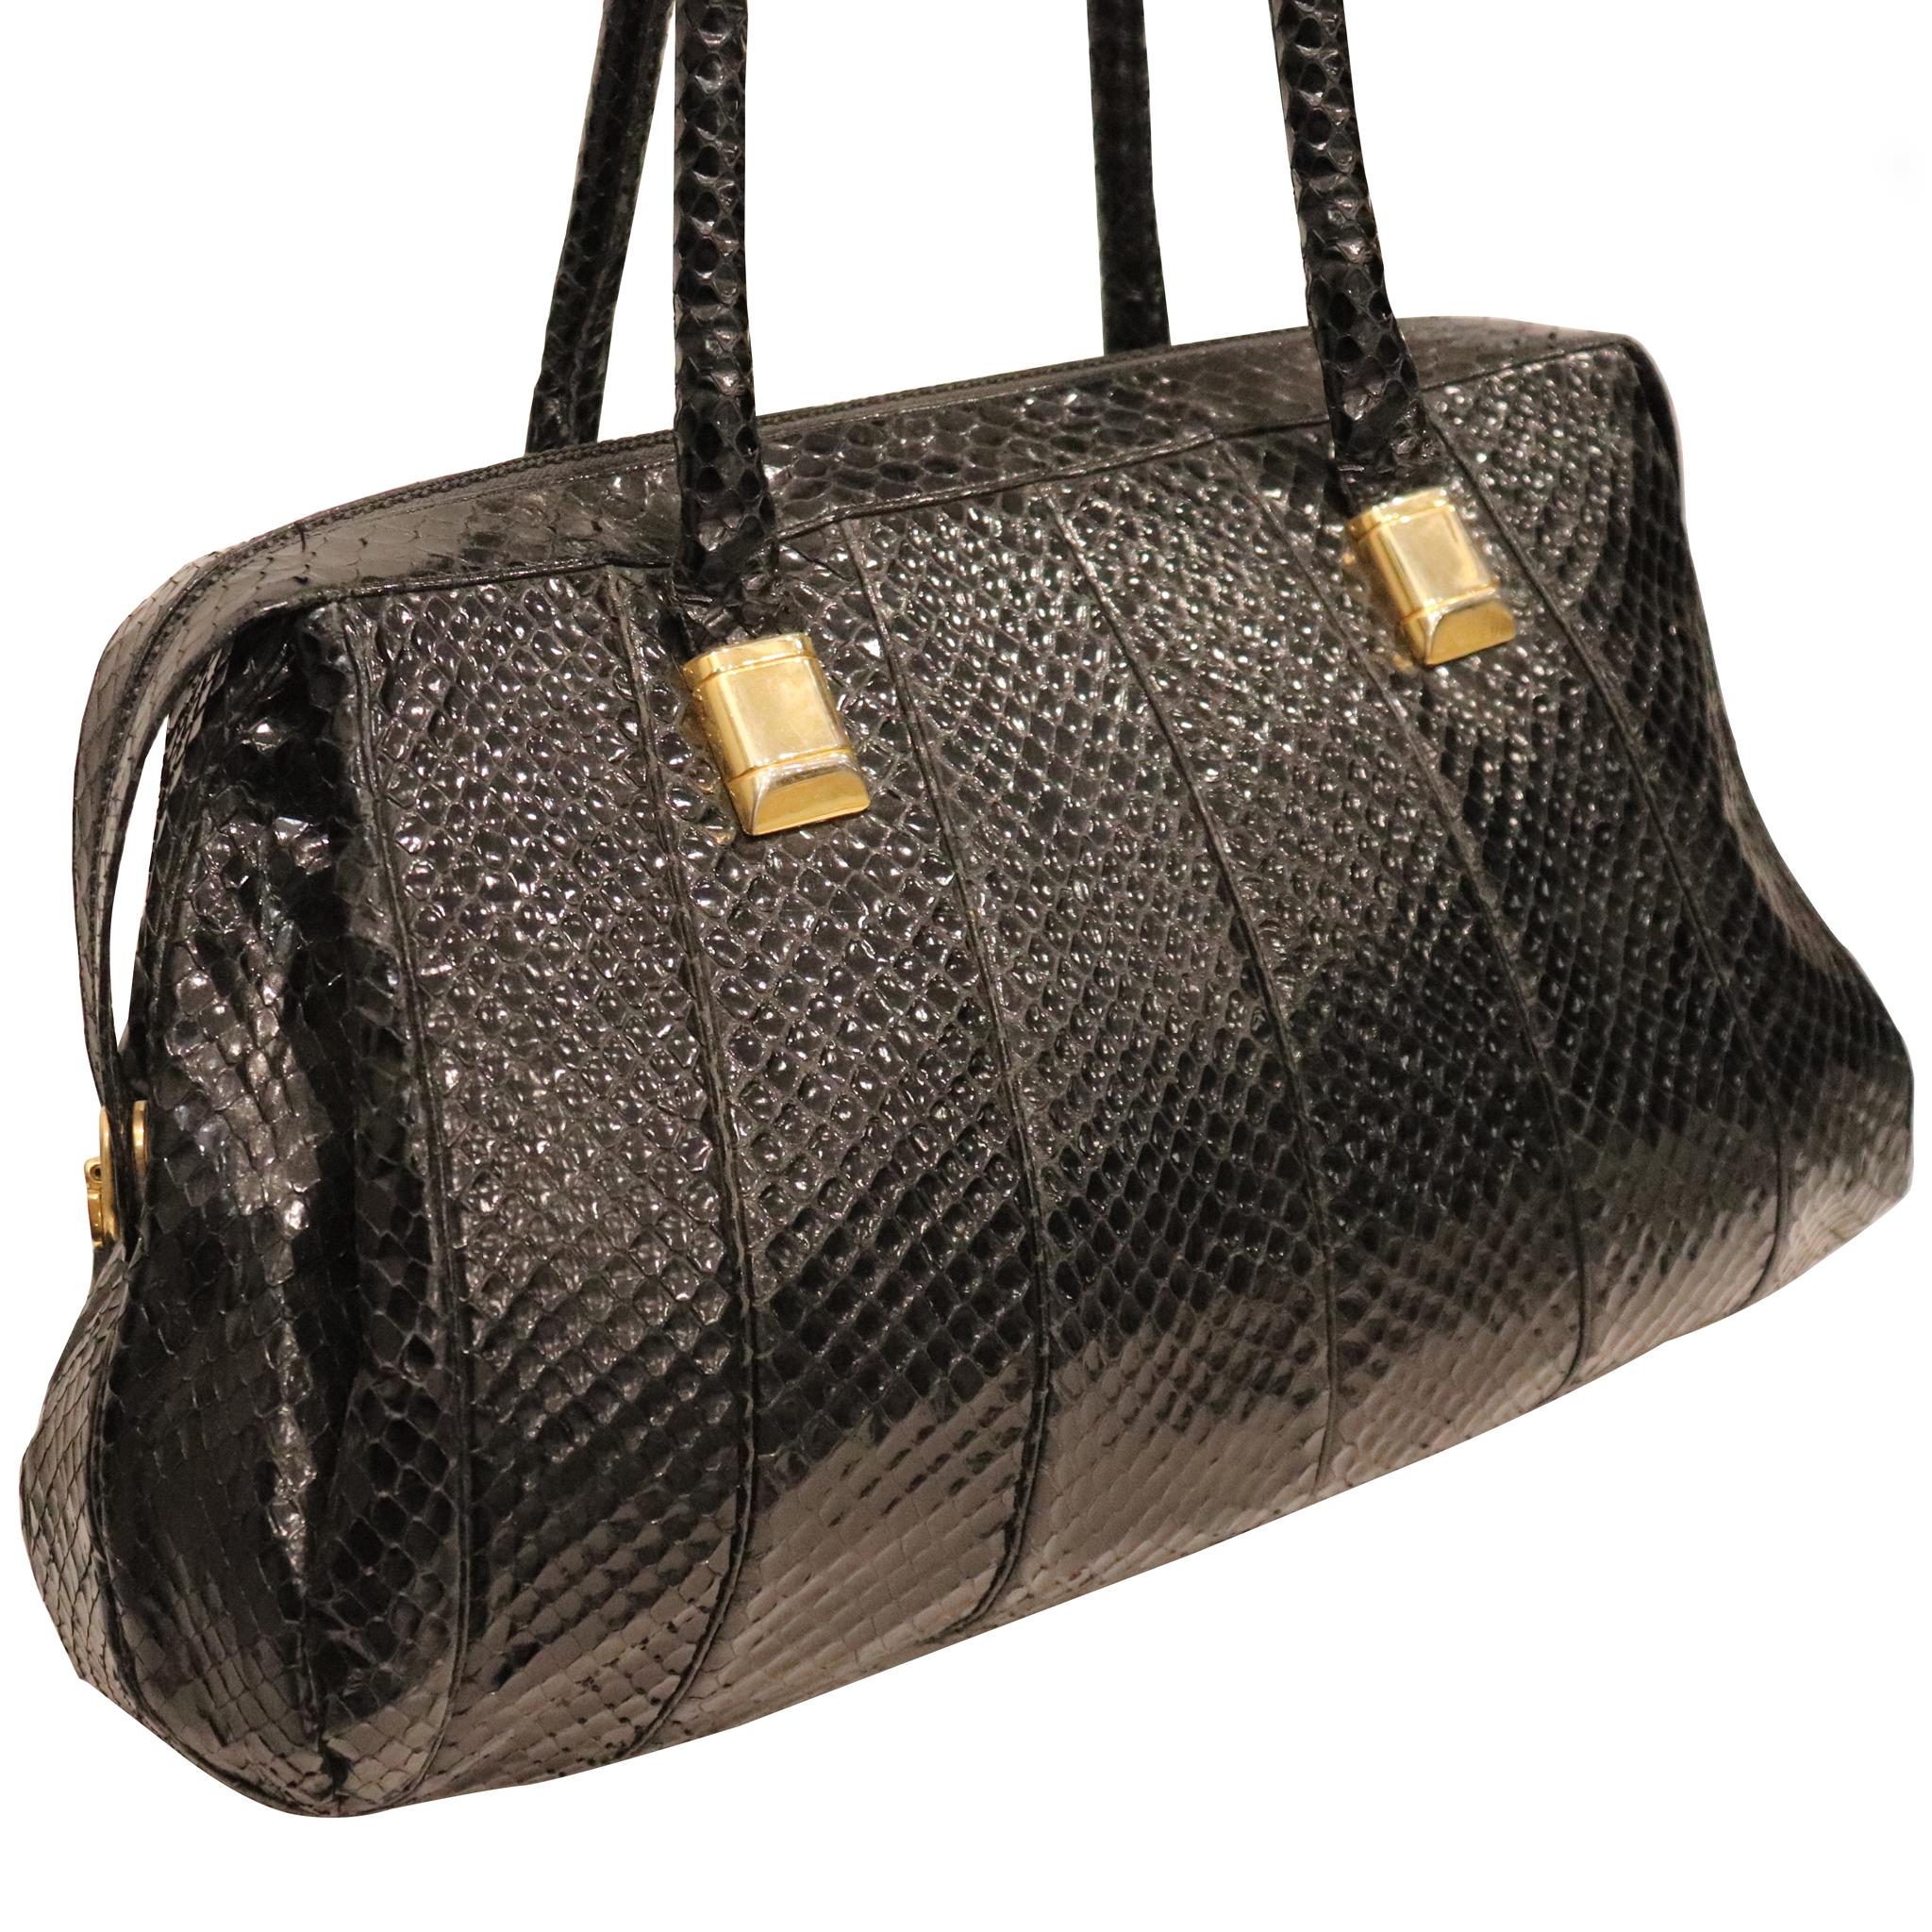 Judith Leiber Black Snake Skin Bag W/ Gold Detail. From 1980s in excellent condition, 

Measurements:

Length - 16 inches
Height - 9 inches 
Width - 6 inches 